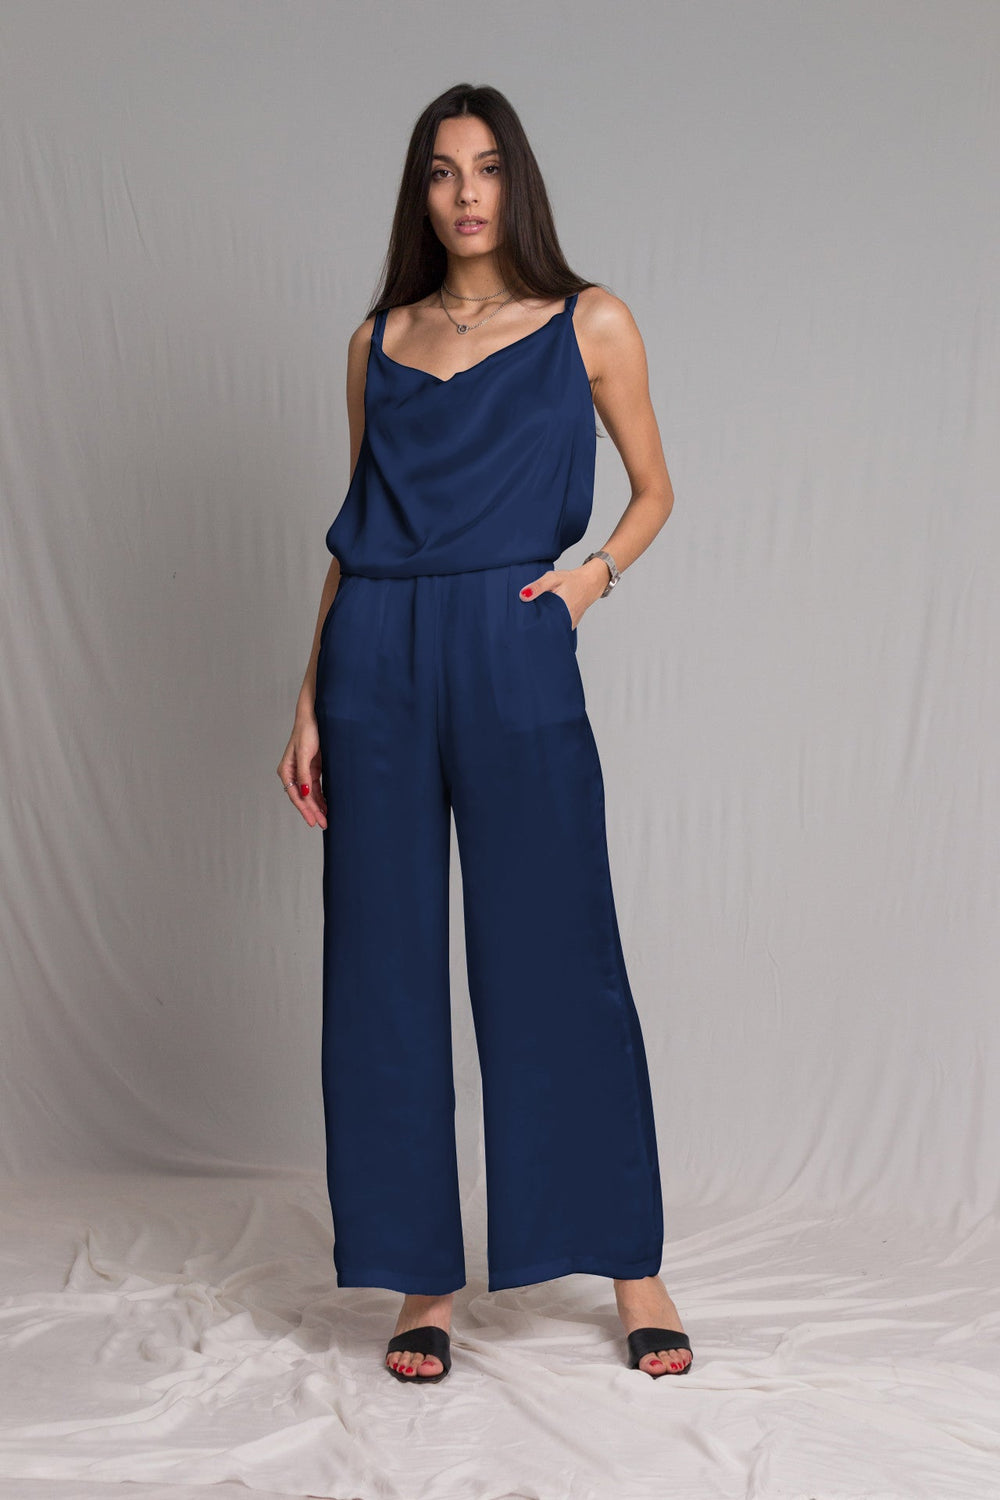 Midnight blue satin jumpsuit with a cowl neckline thin straps and a risque low back